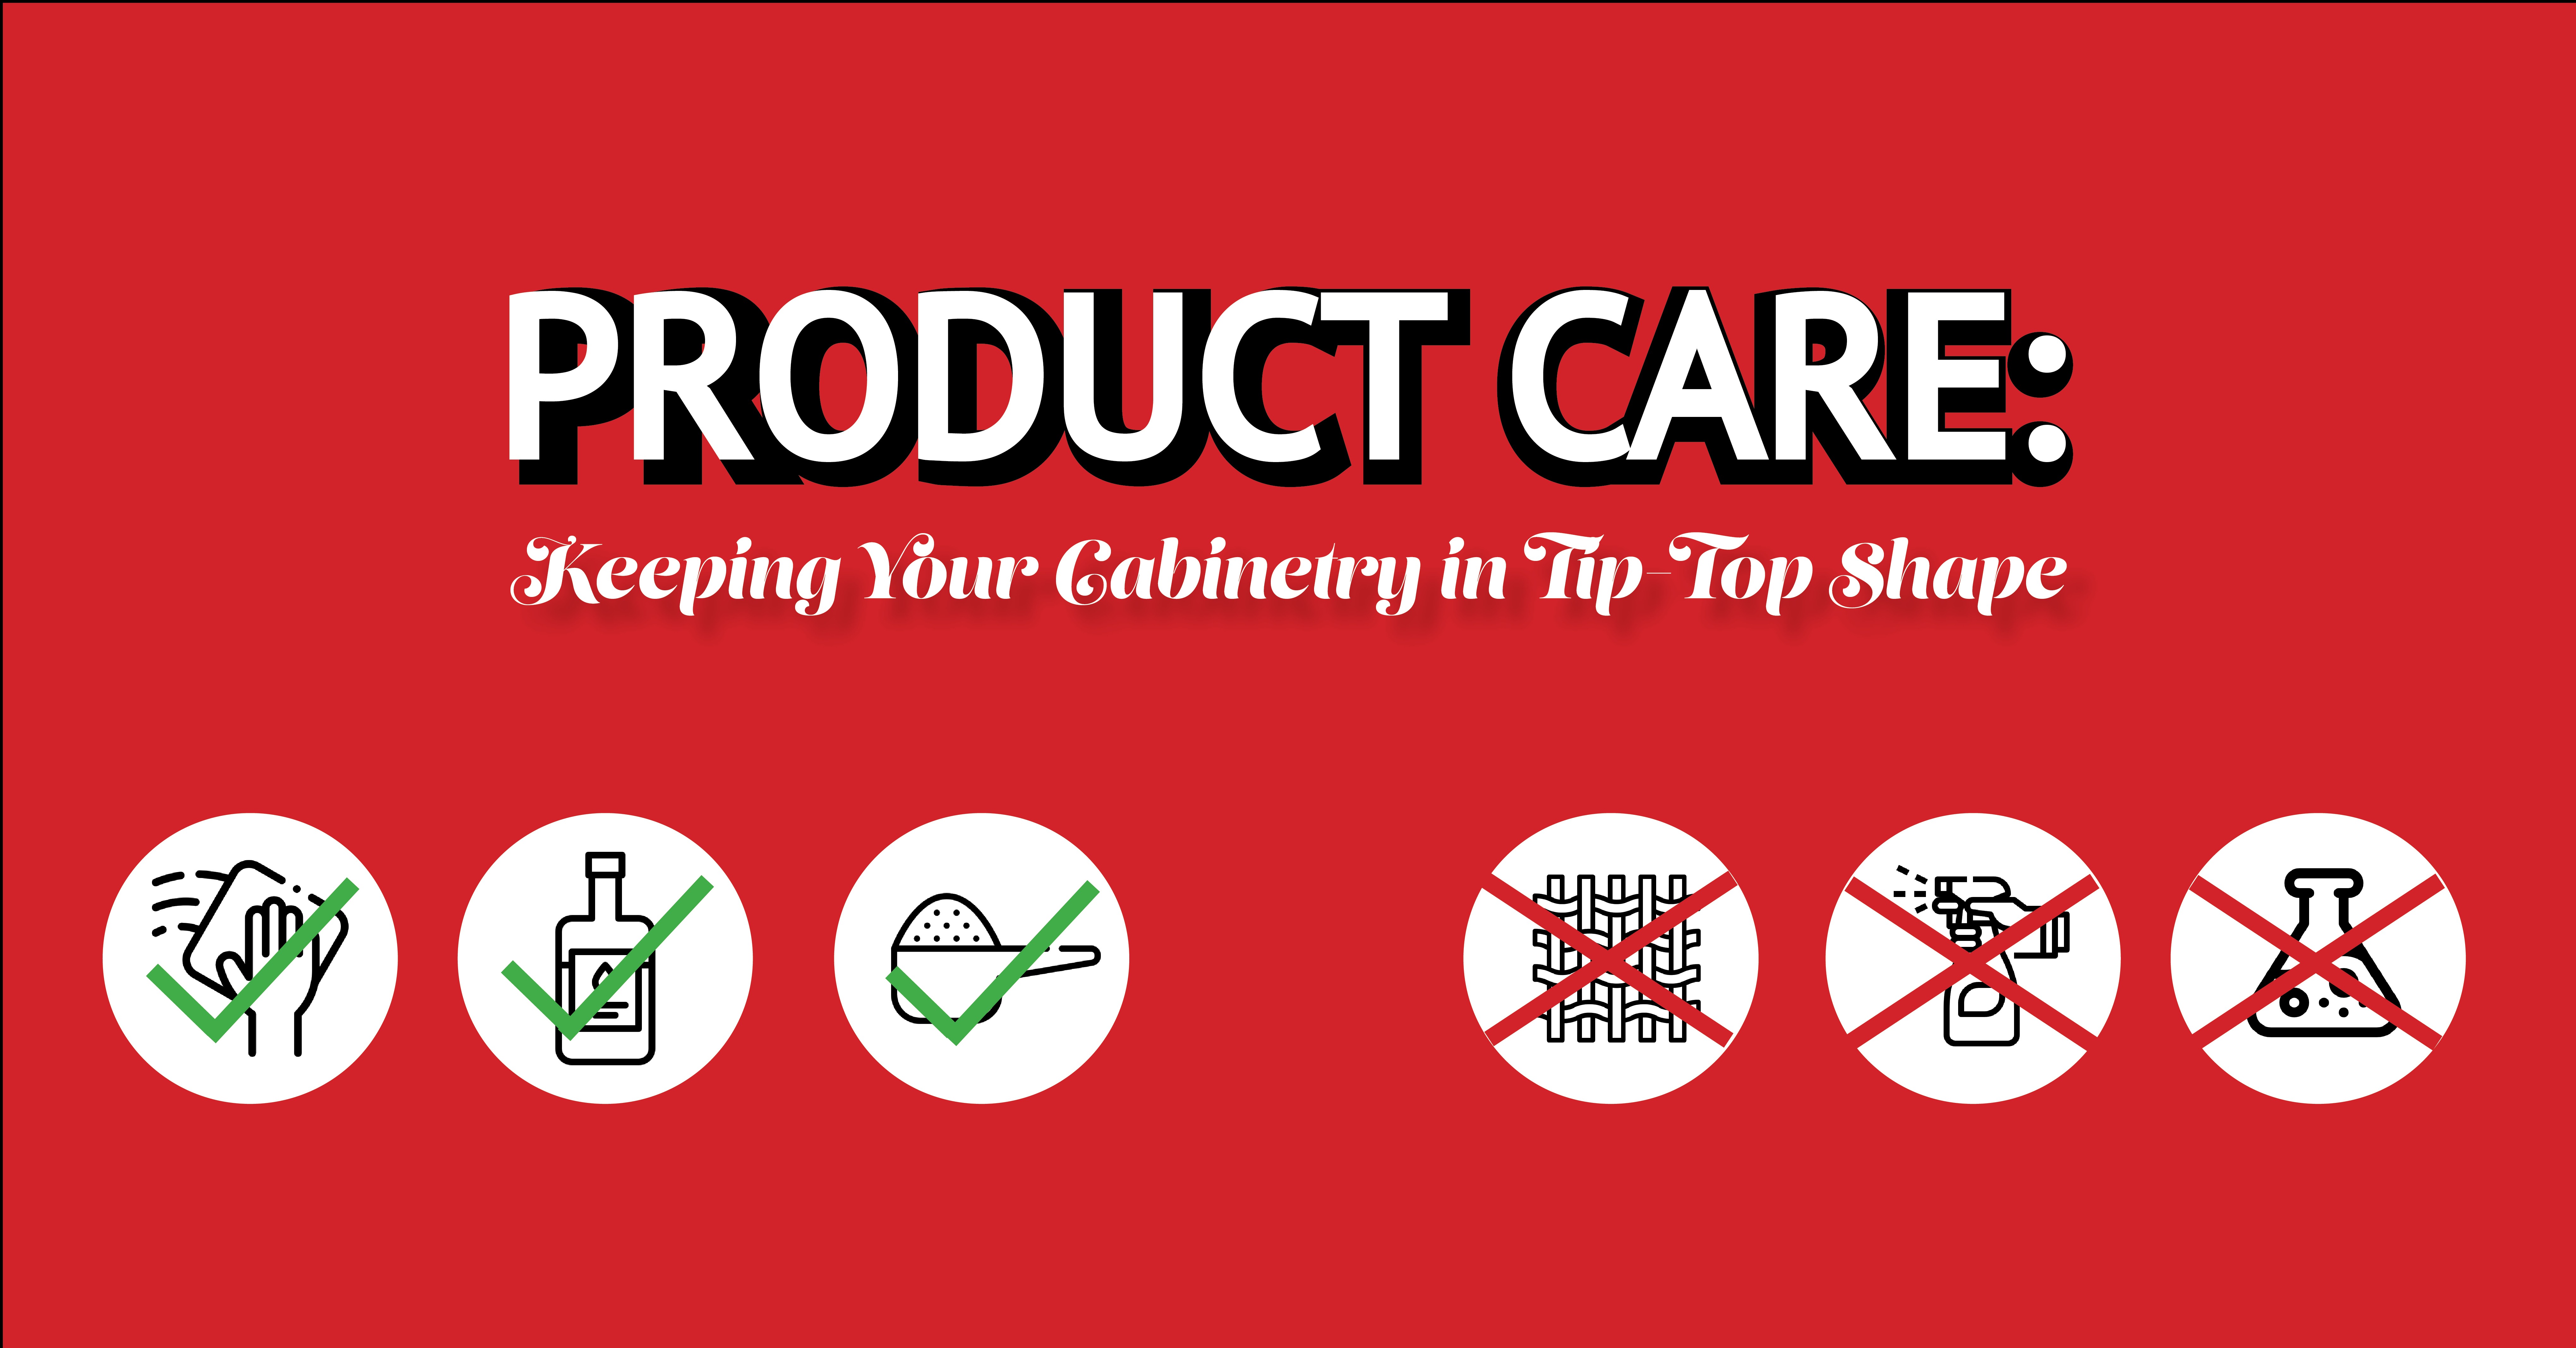 Product Care: Keeping Your Cabinetry in Tip-Top Shape